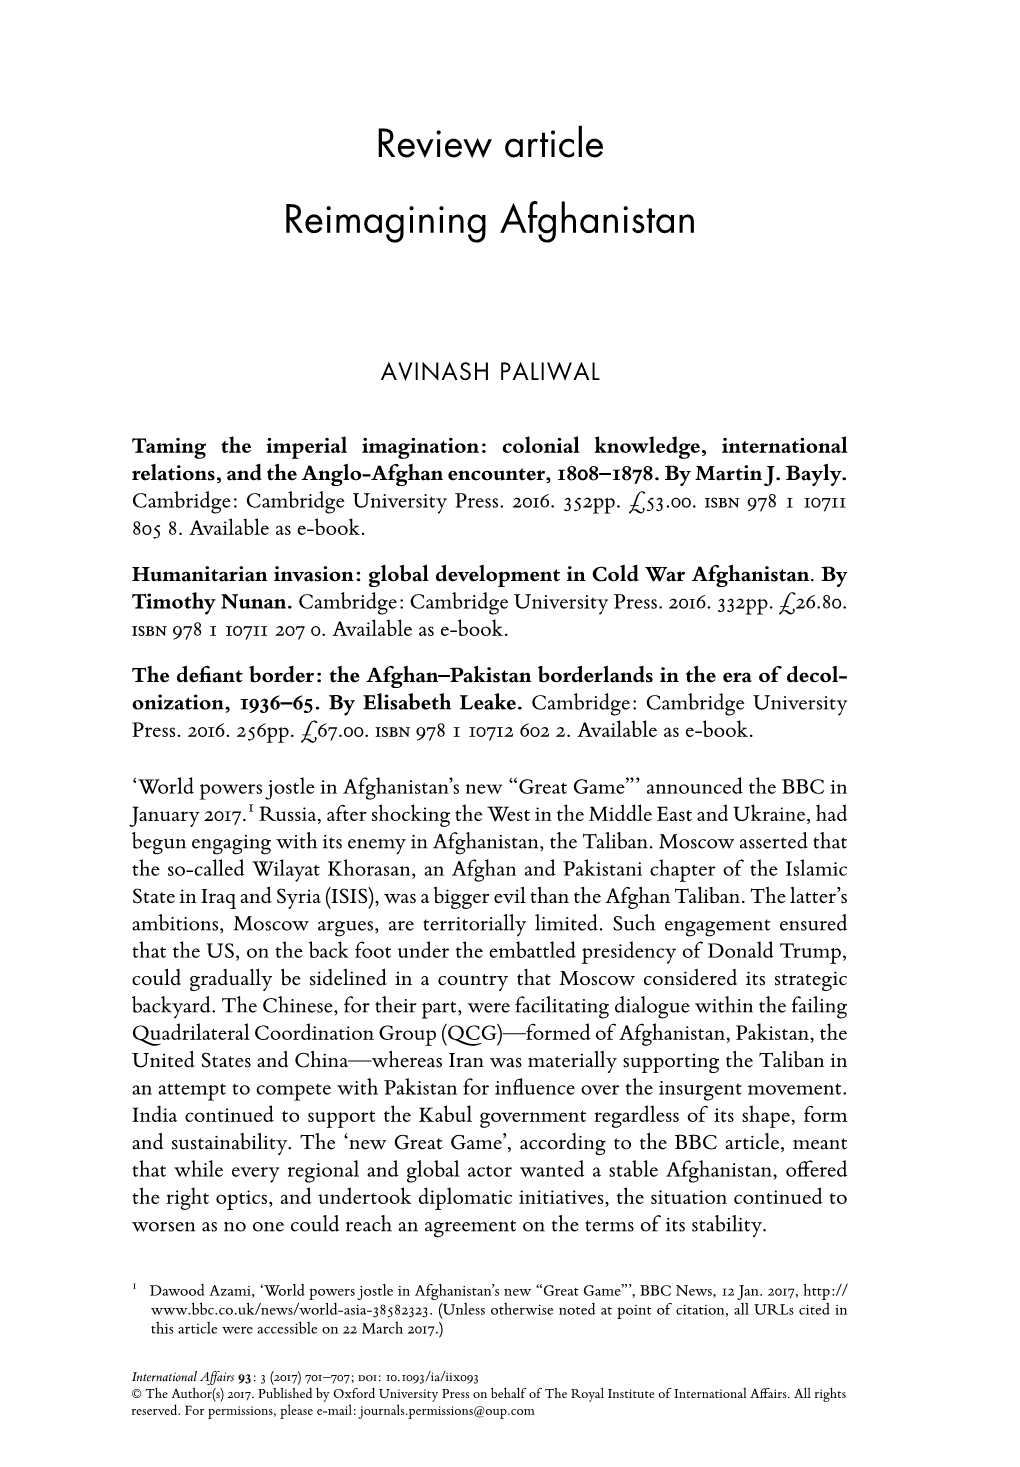 Review Article Reimagining Afghanistan